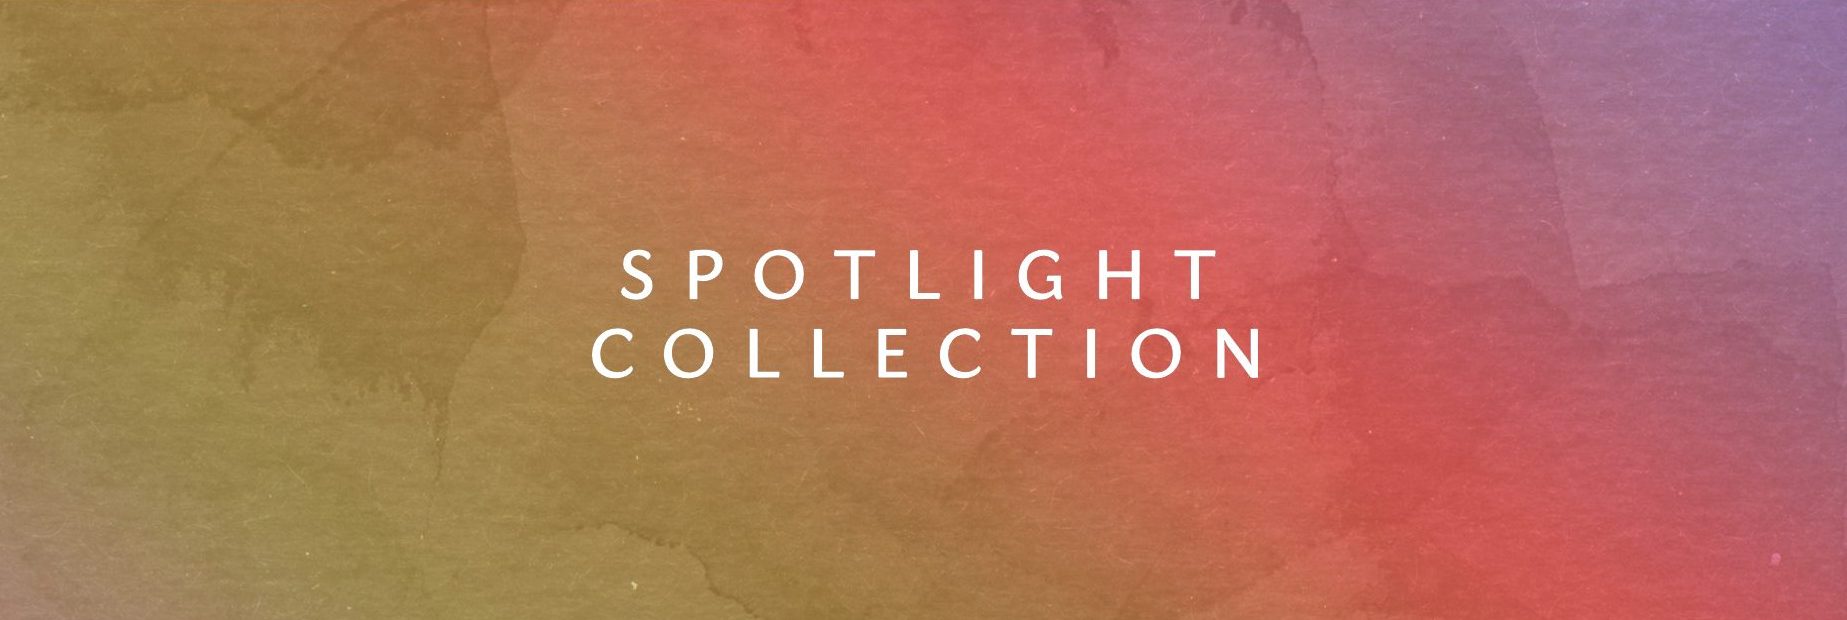 Native Instruments Spotlight Collection